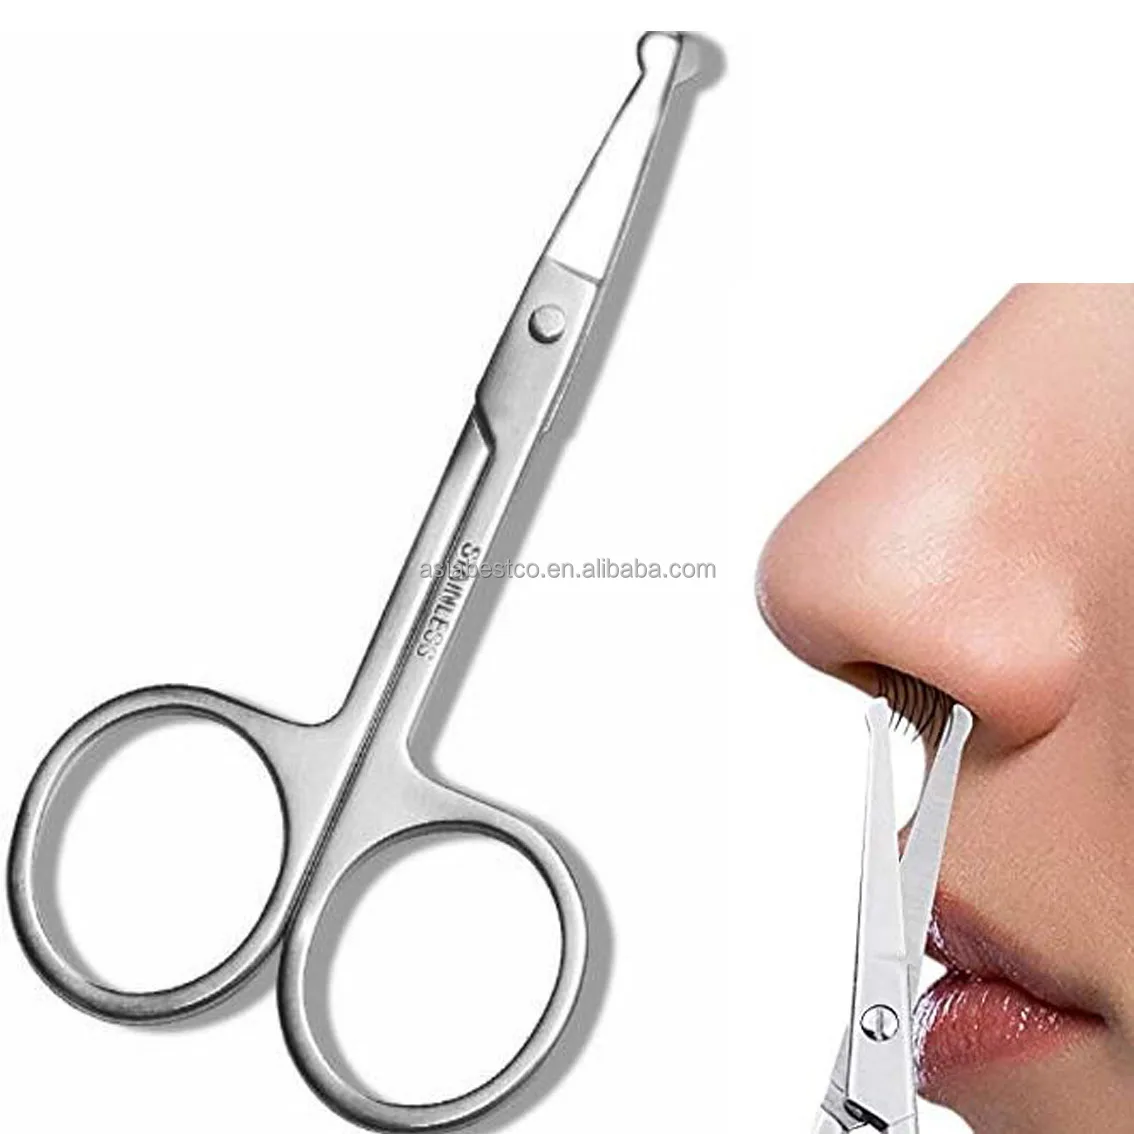 Stainless Steel Mustache Nose Hair Cutting Scissors Rounded Nose Hair  Scissors - Buy Nose Hair Scissors,Mustache Hair Scissors,Nose Scissors  Product on 